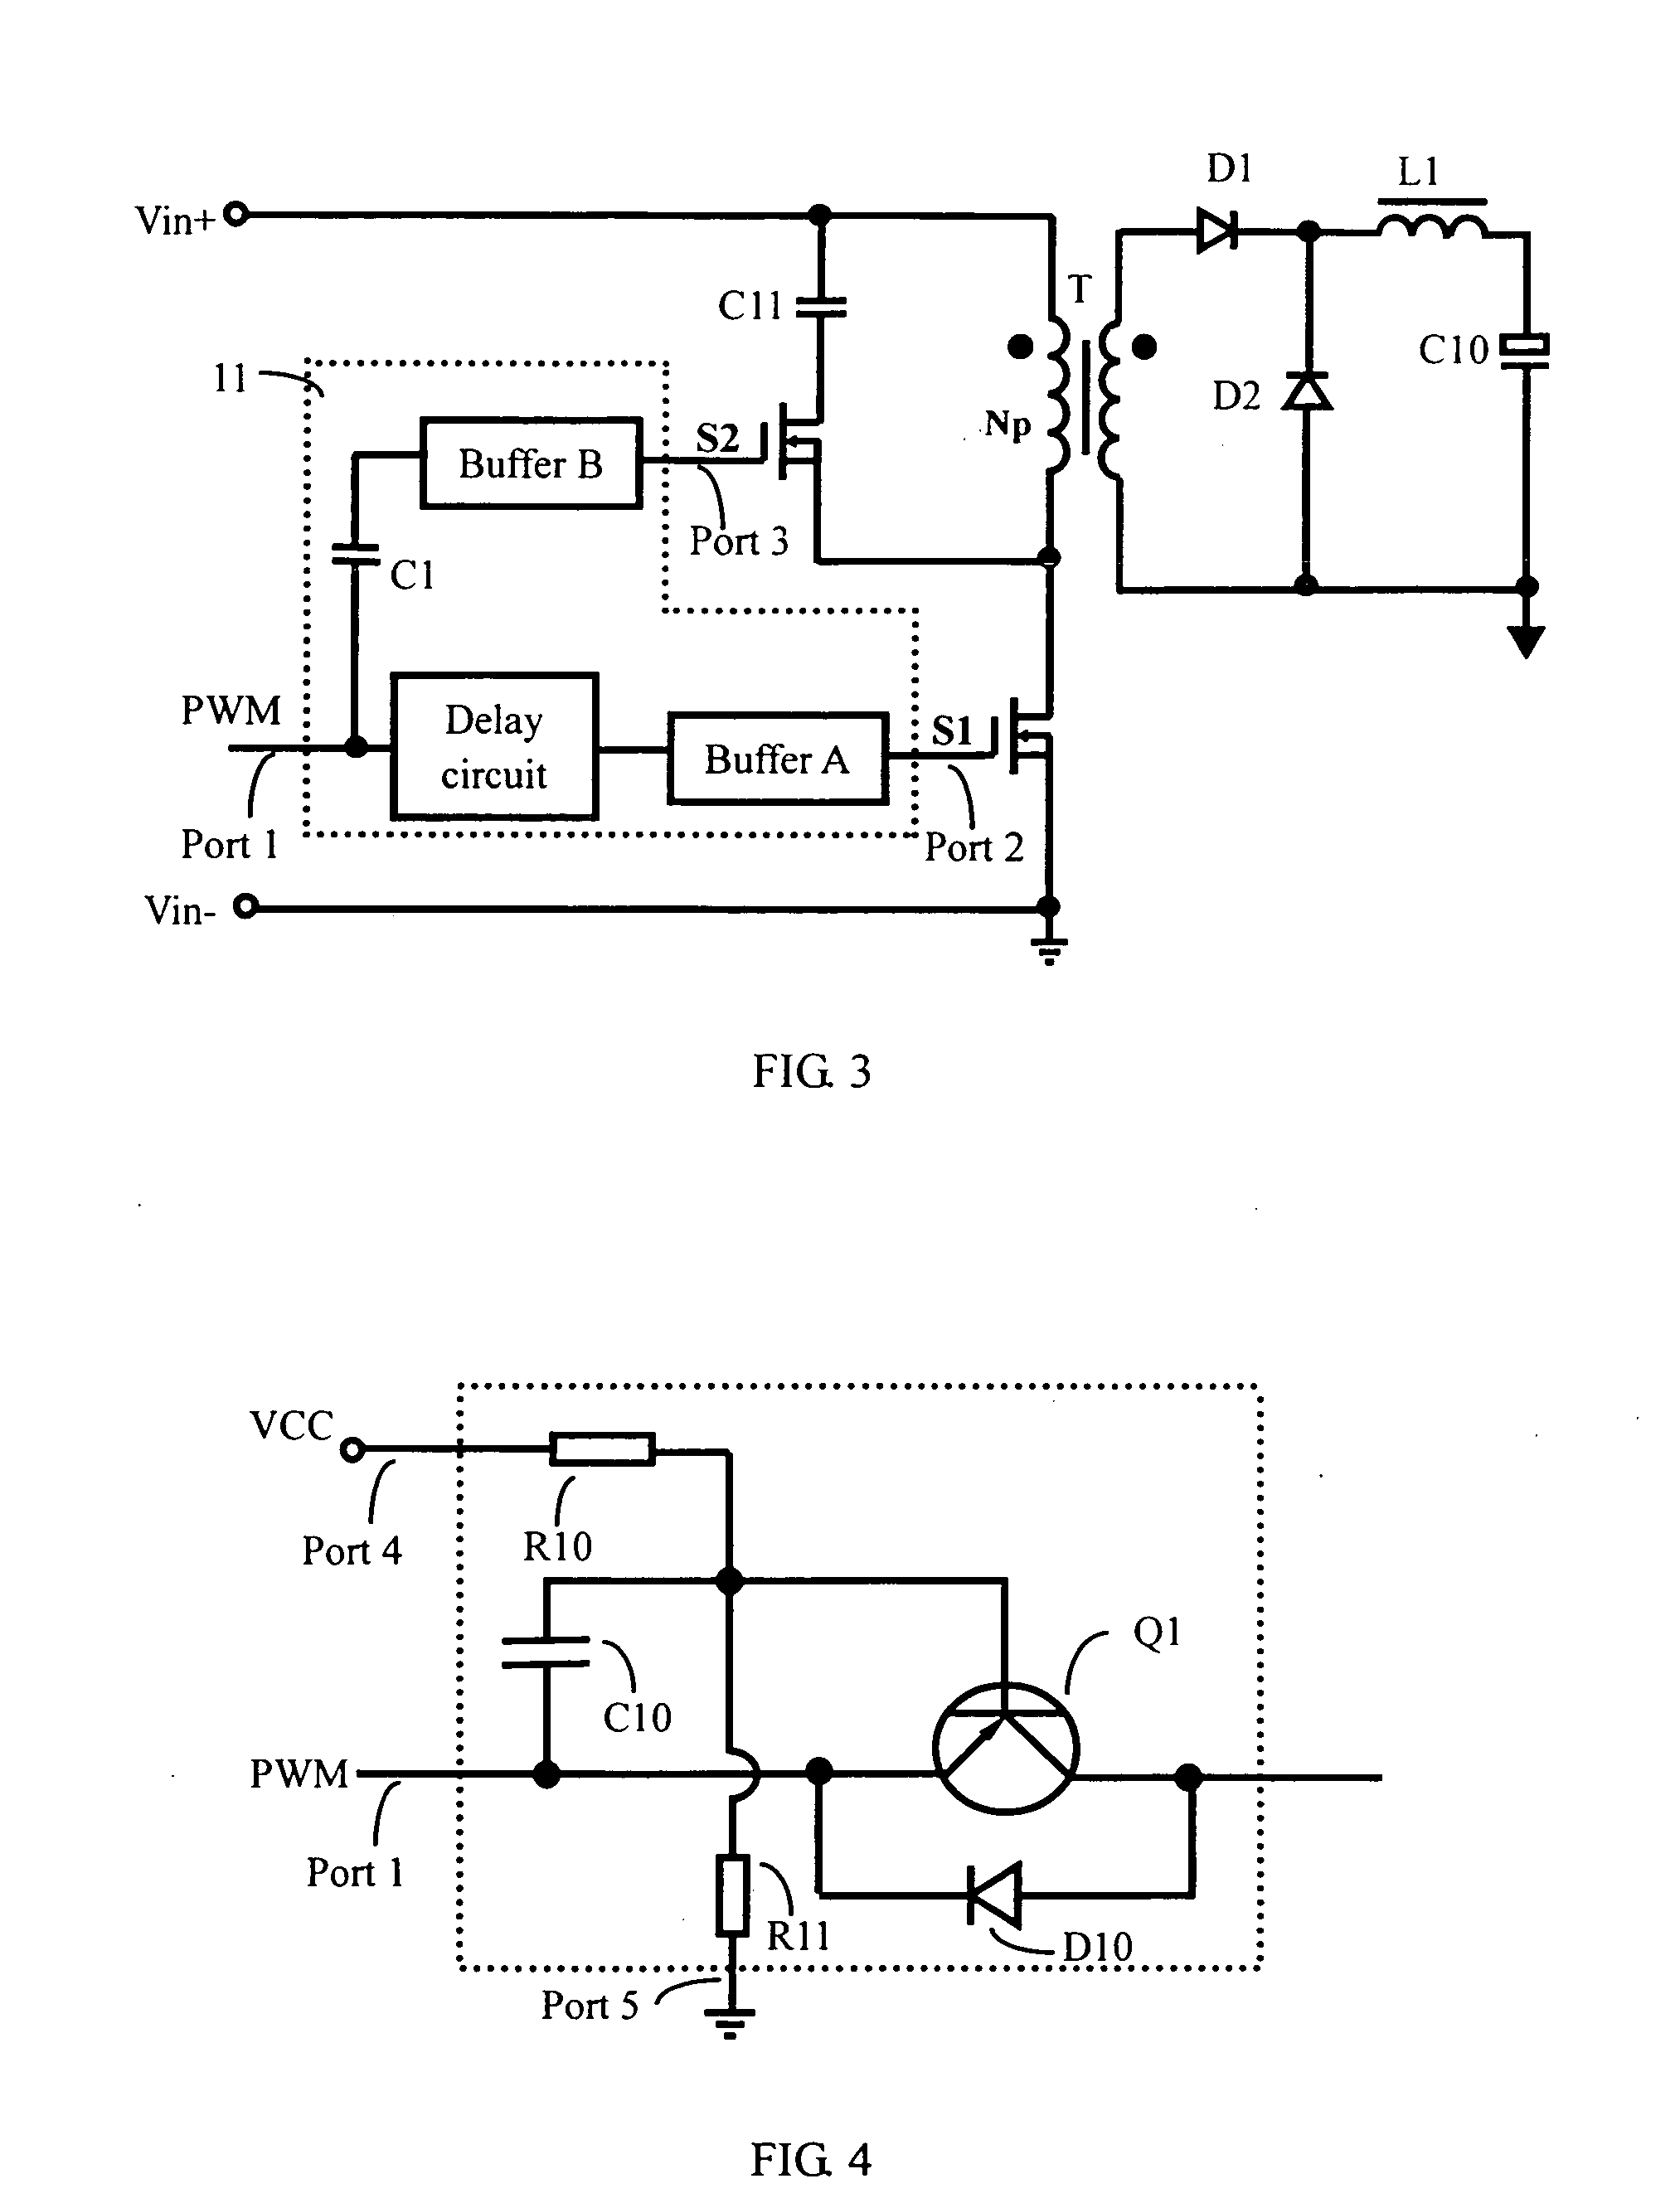 Driving circuit for DC/DC converter